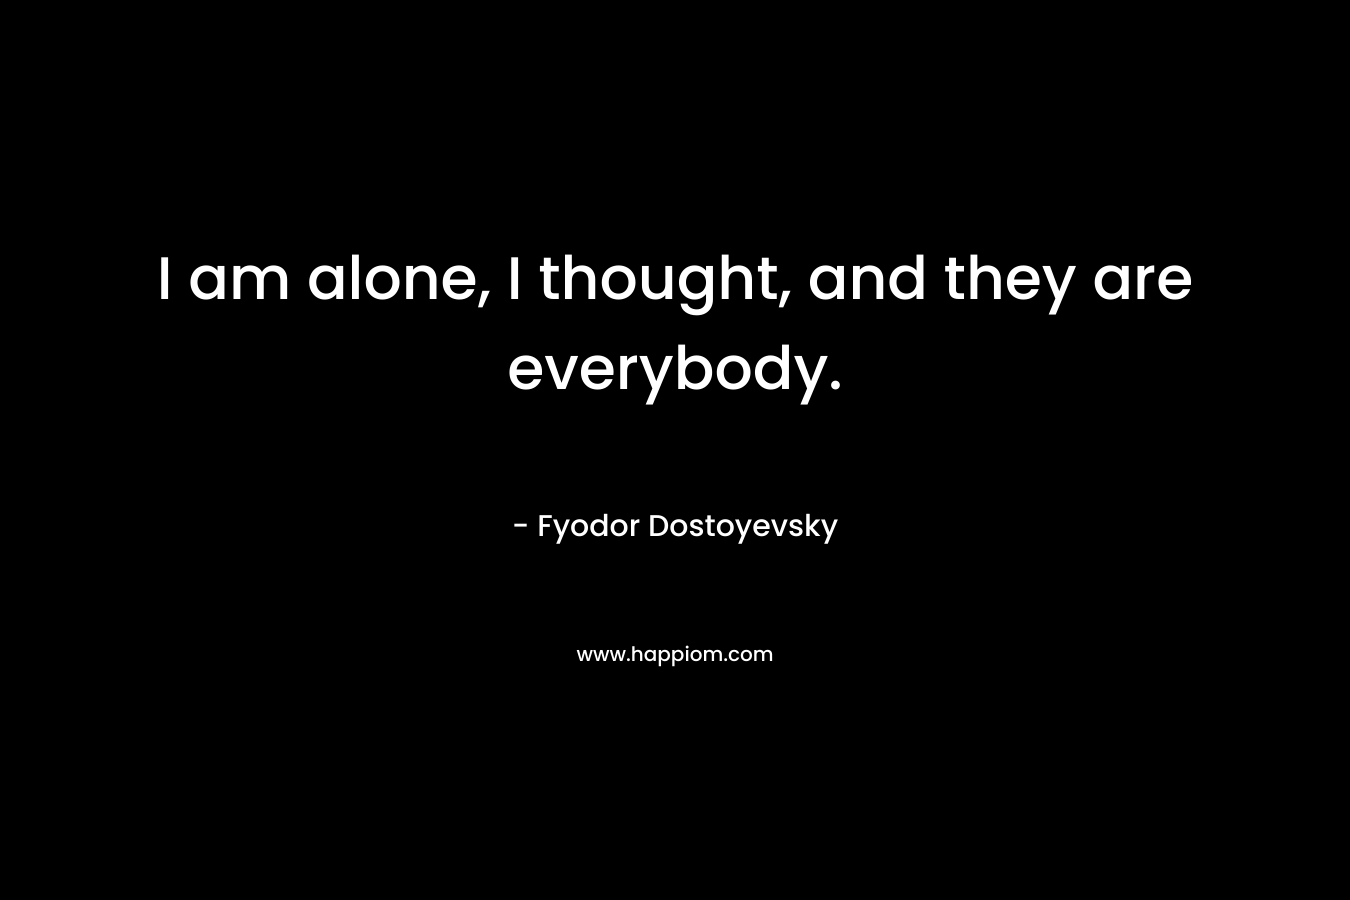 I am alone, I thought, and they are everybody.